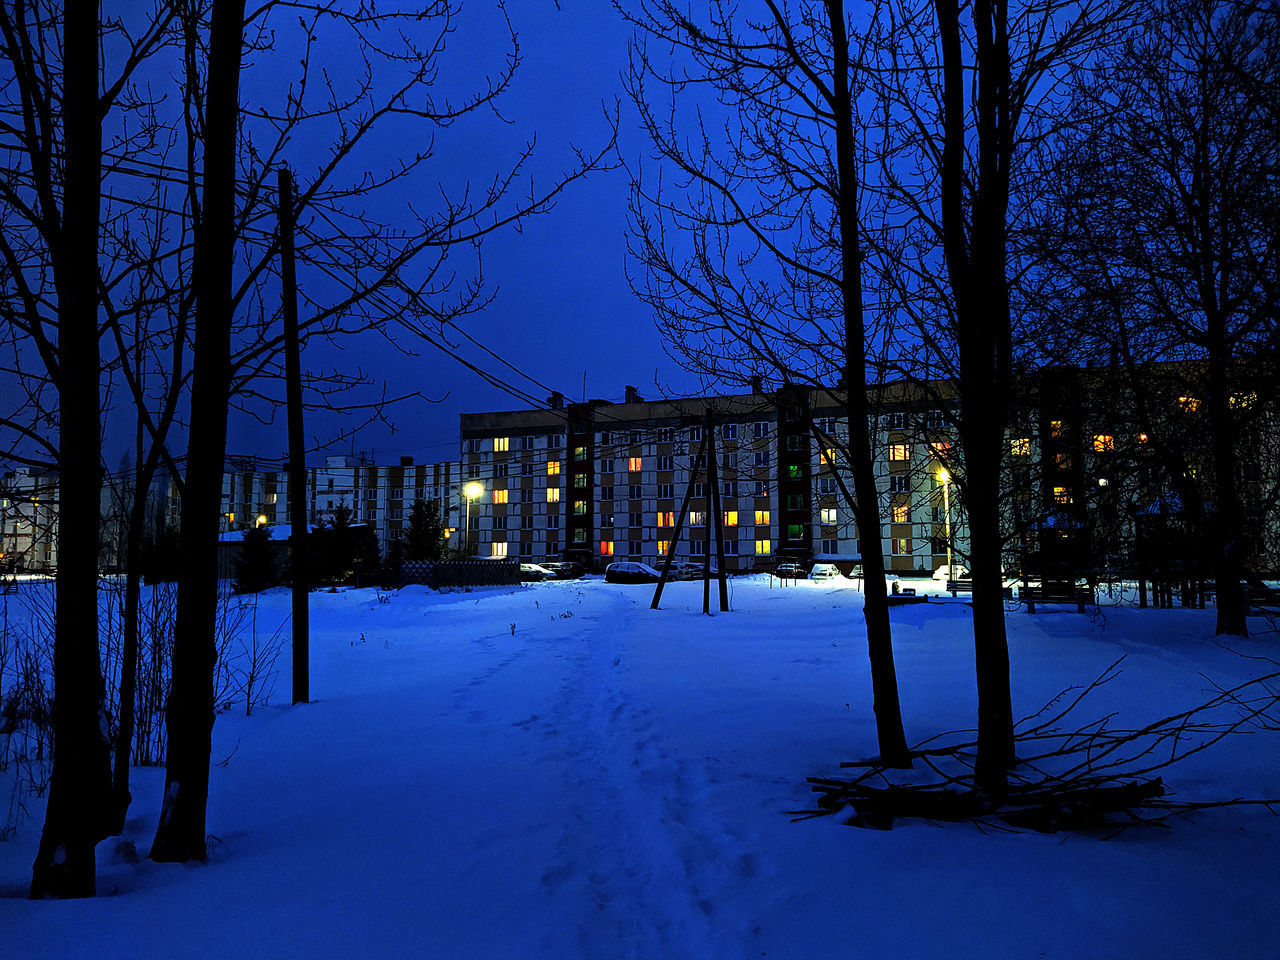 snow, winter, cold temperature, tree, bare tree, night, evening, architecture, plant, nature, illuminated, building exterior, built structure, no people, dusk, city, sky, freezing, light, frozen, outdoors, beauty in nature, building, tranquility, street, covering, scenics - nature, blue, environment, reflection, branch